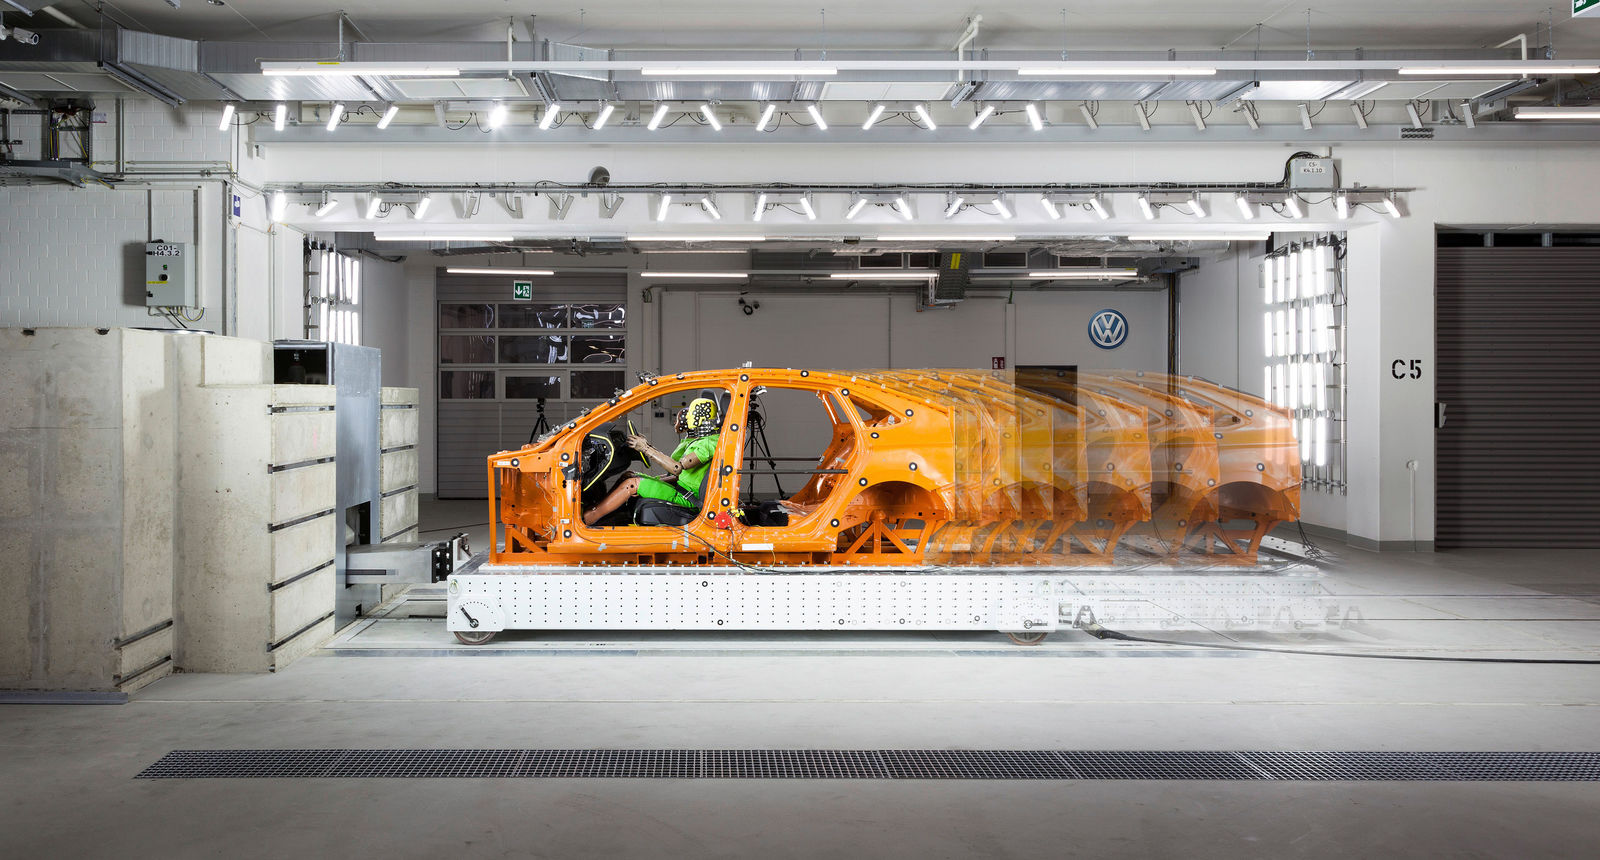 New Volkswagen Centre of Competence for Safety